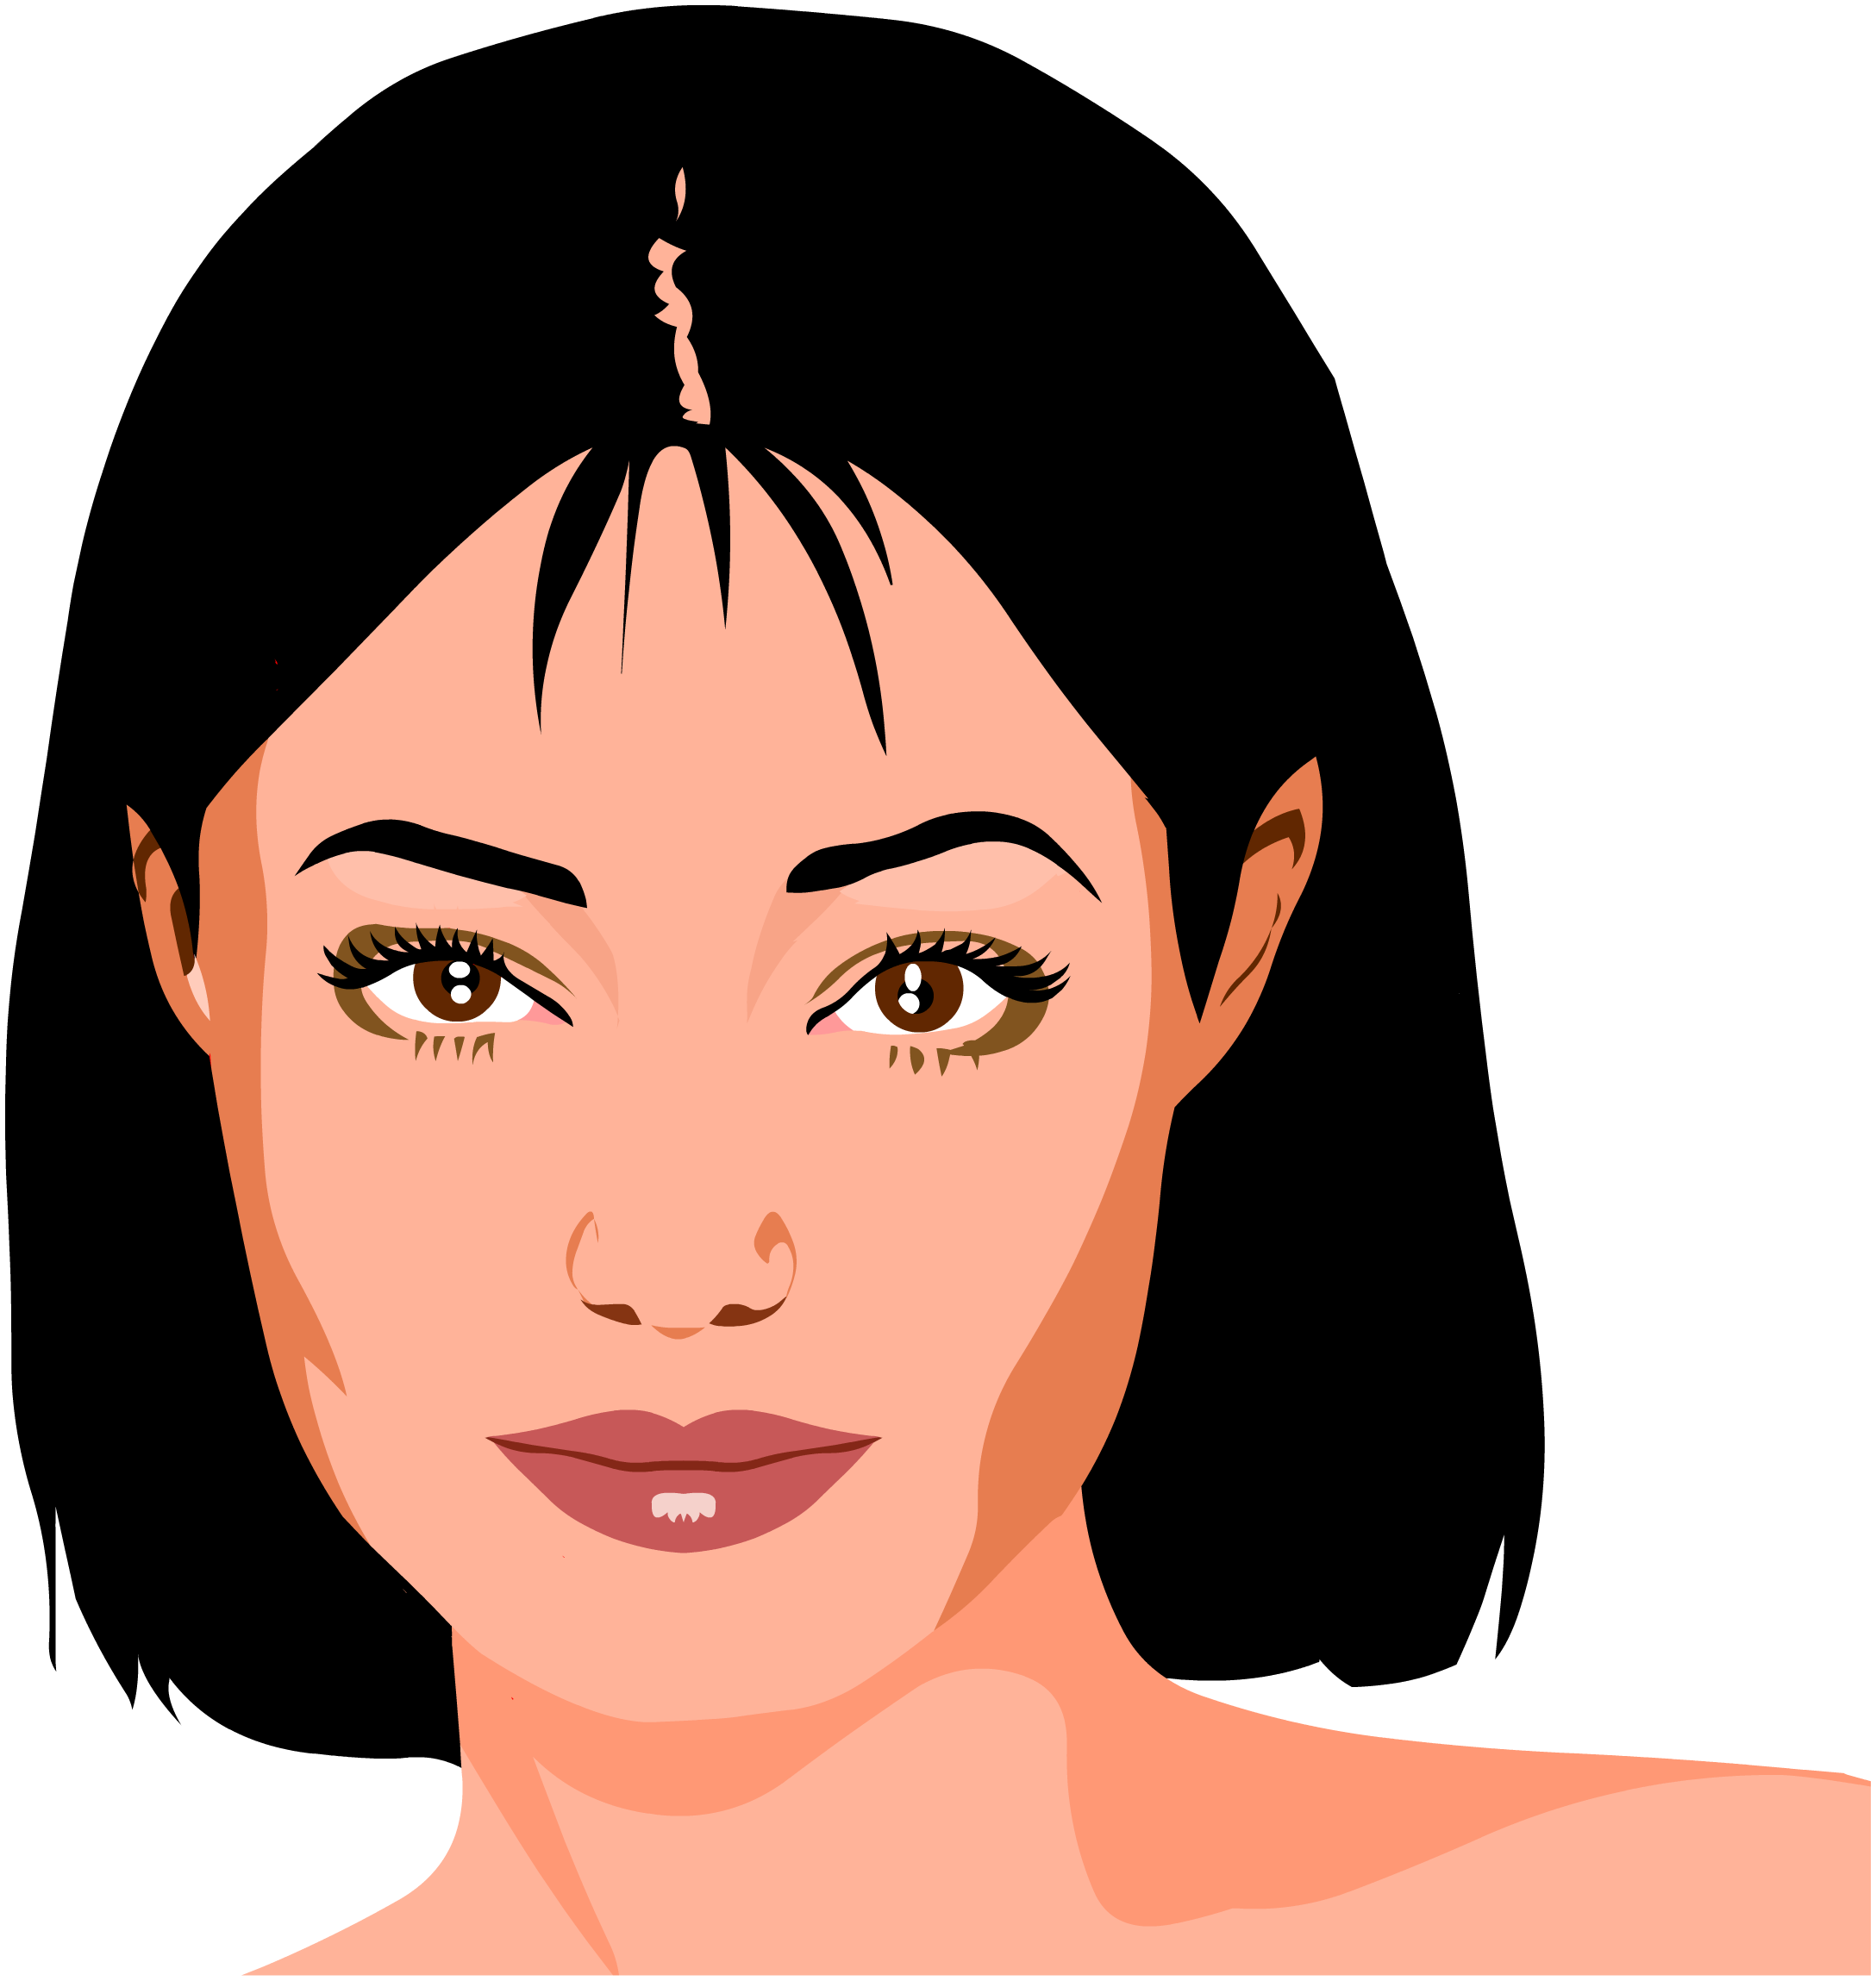 Woman With Dark Hair Portrait Drawing Free Image Download 4862